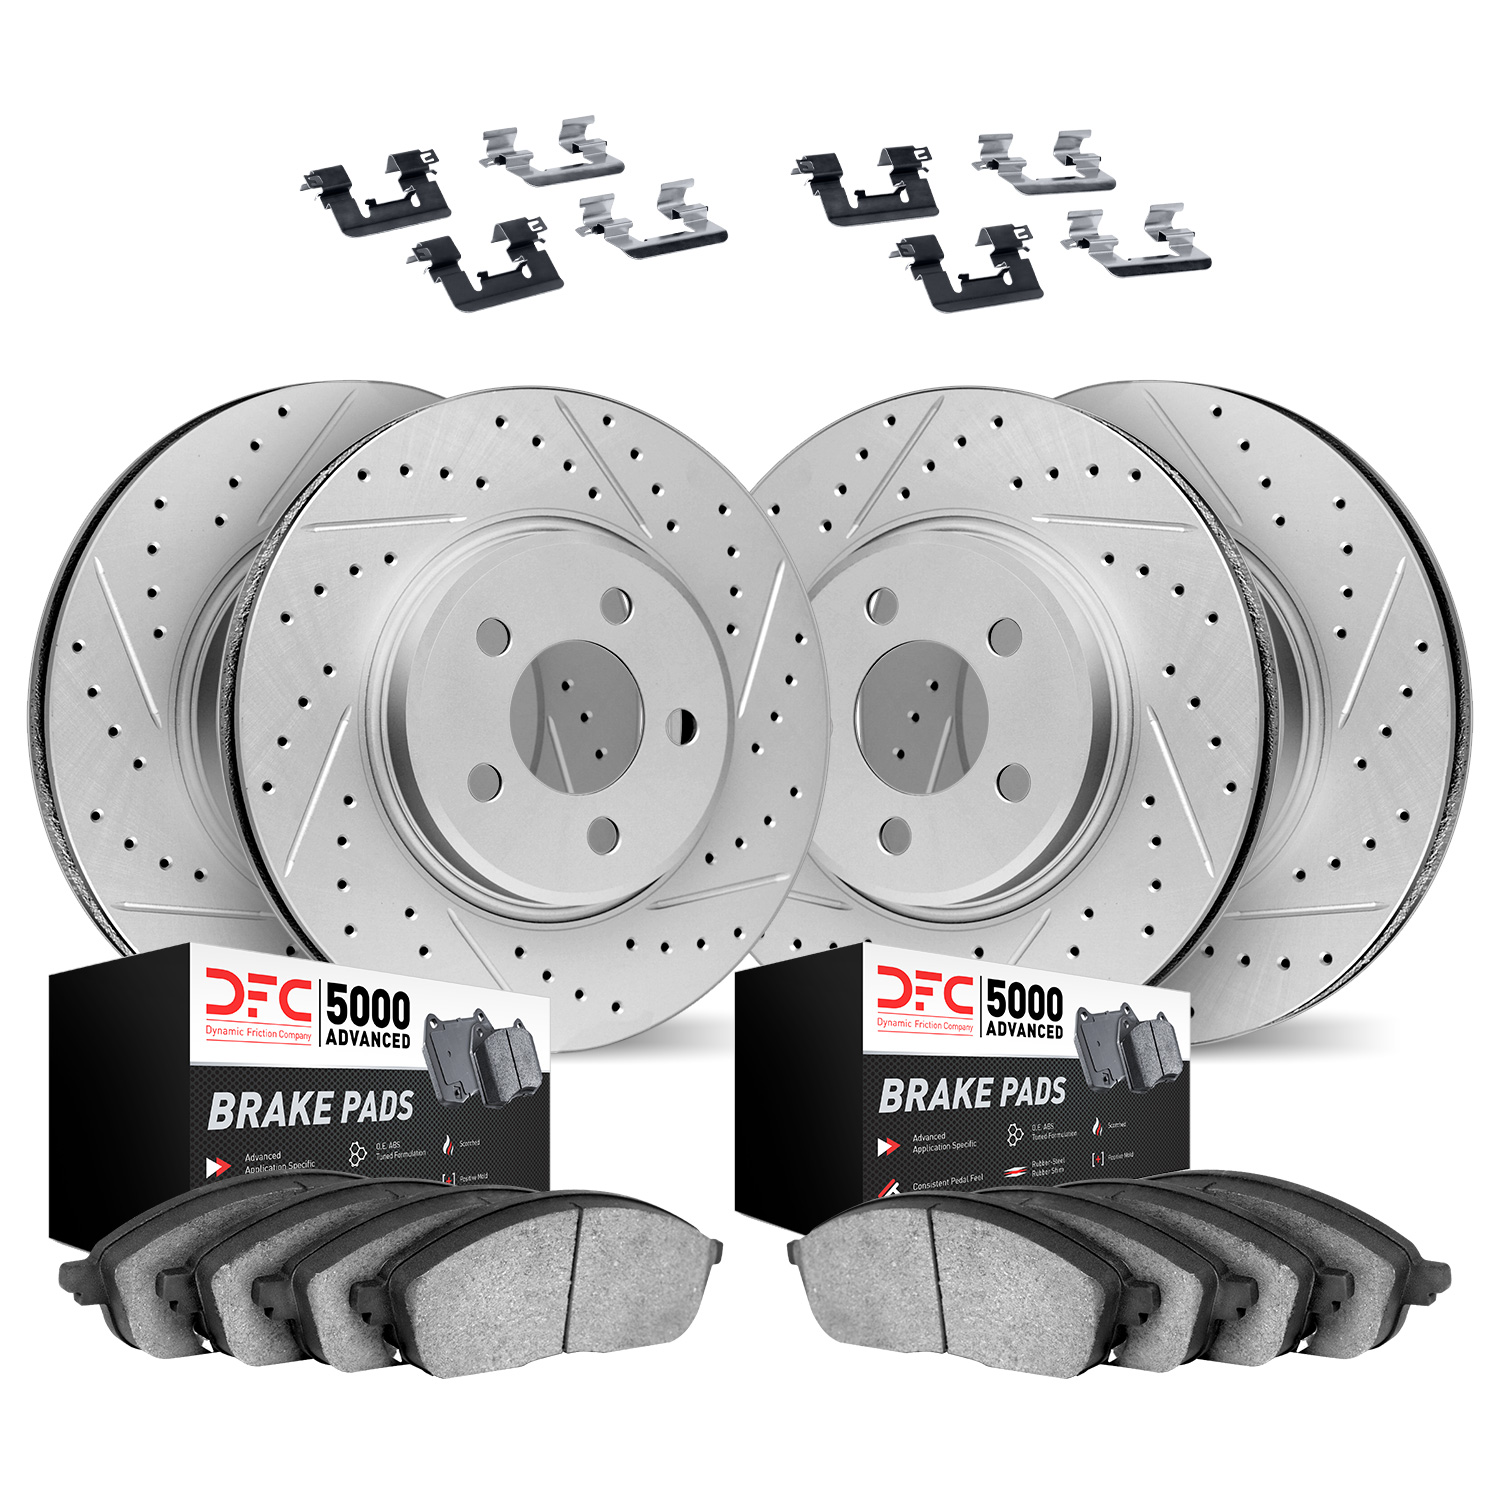 2514-31012 Geoperformance Drilled/Slotted Rotors w/5000 Advanced Brake Pads Kit & Hardware, 2006-2007 BMW, Position: Front and R